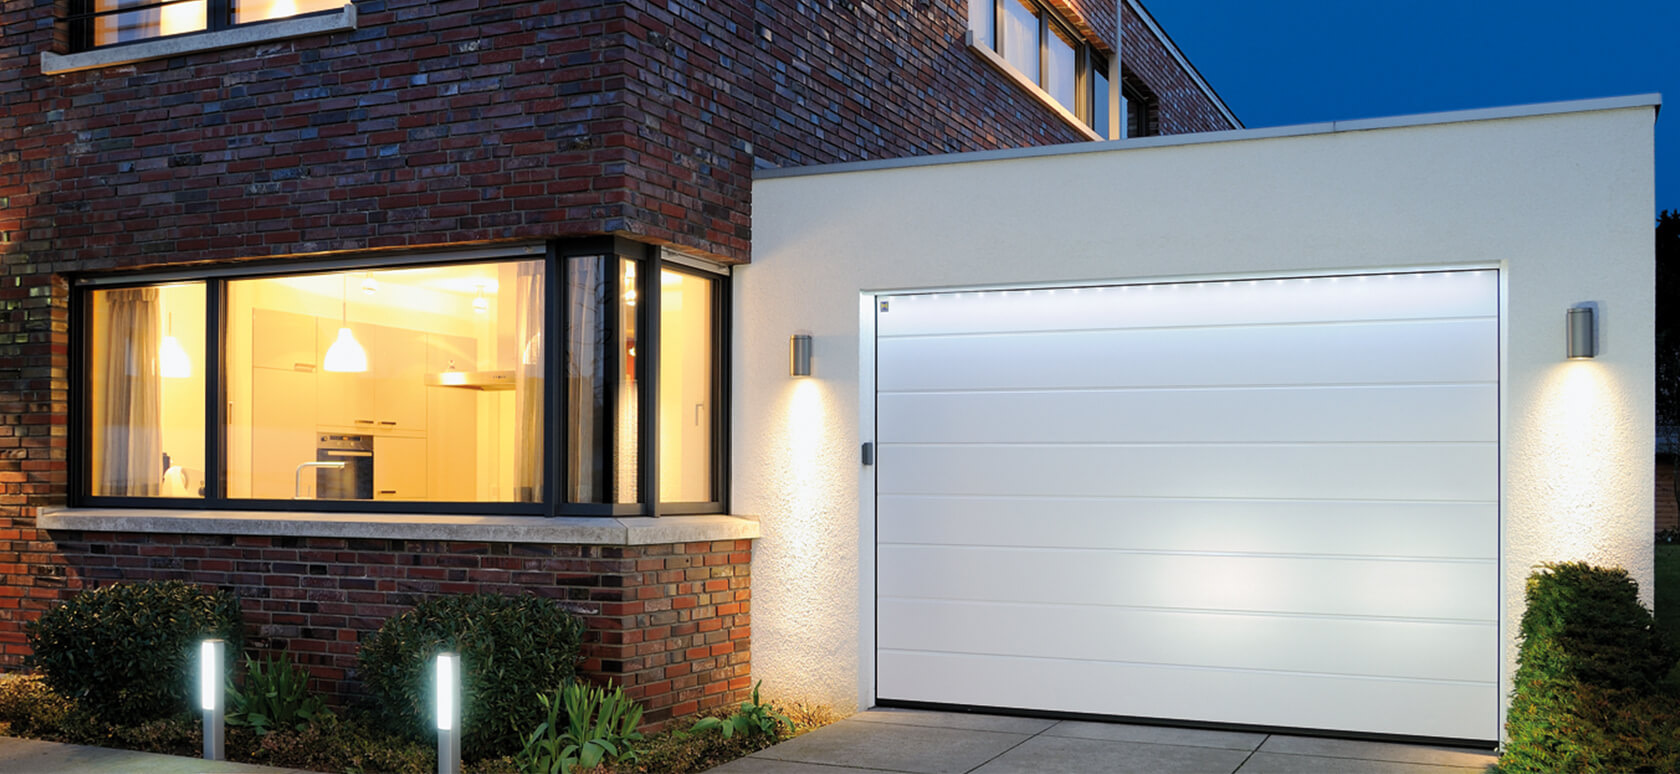 Simple Garage Door Suppliers Rotherham for Large Space